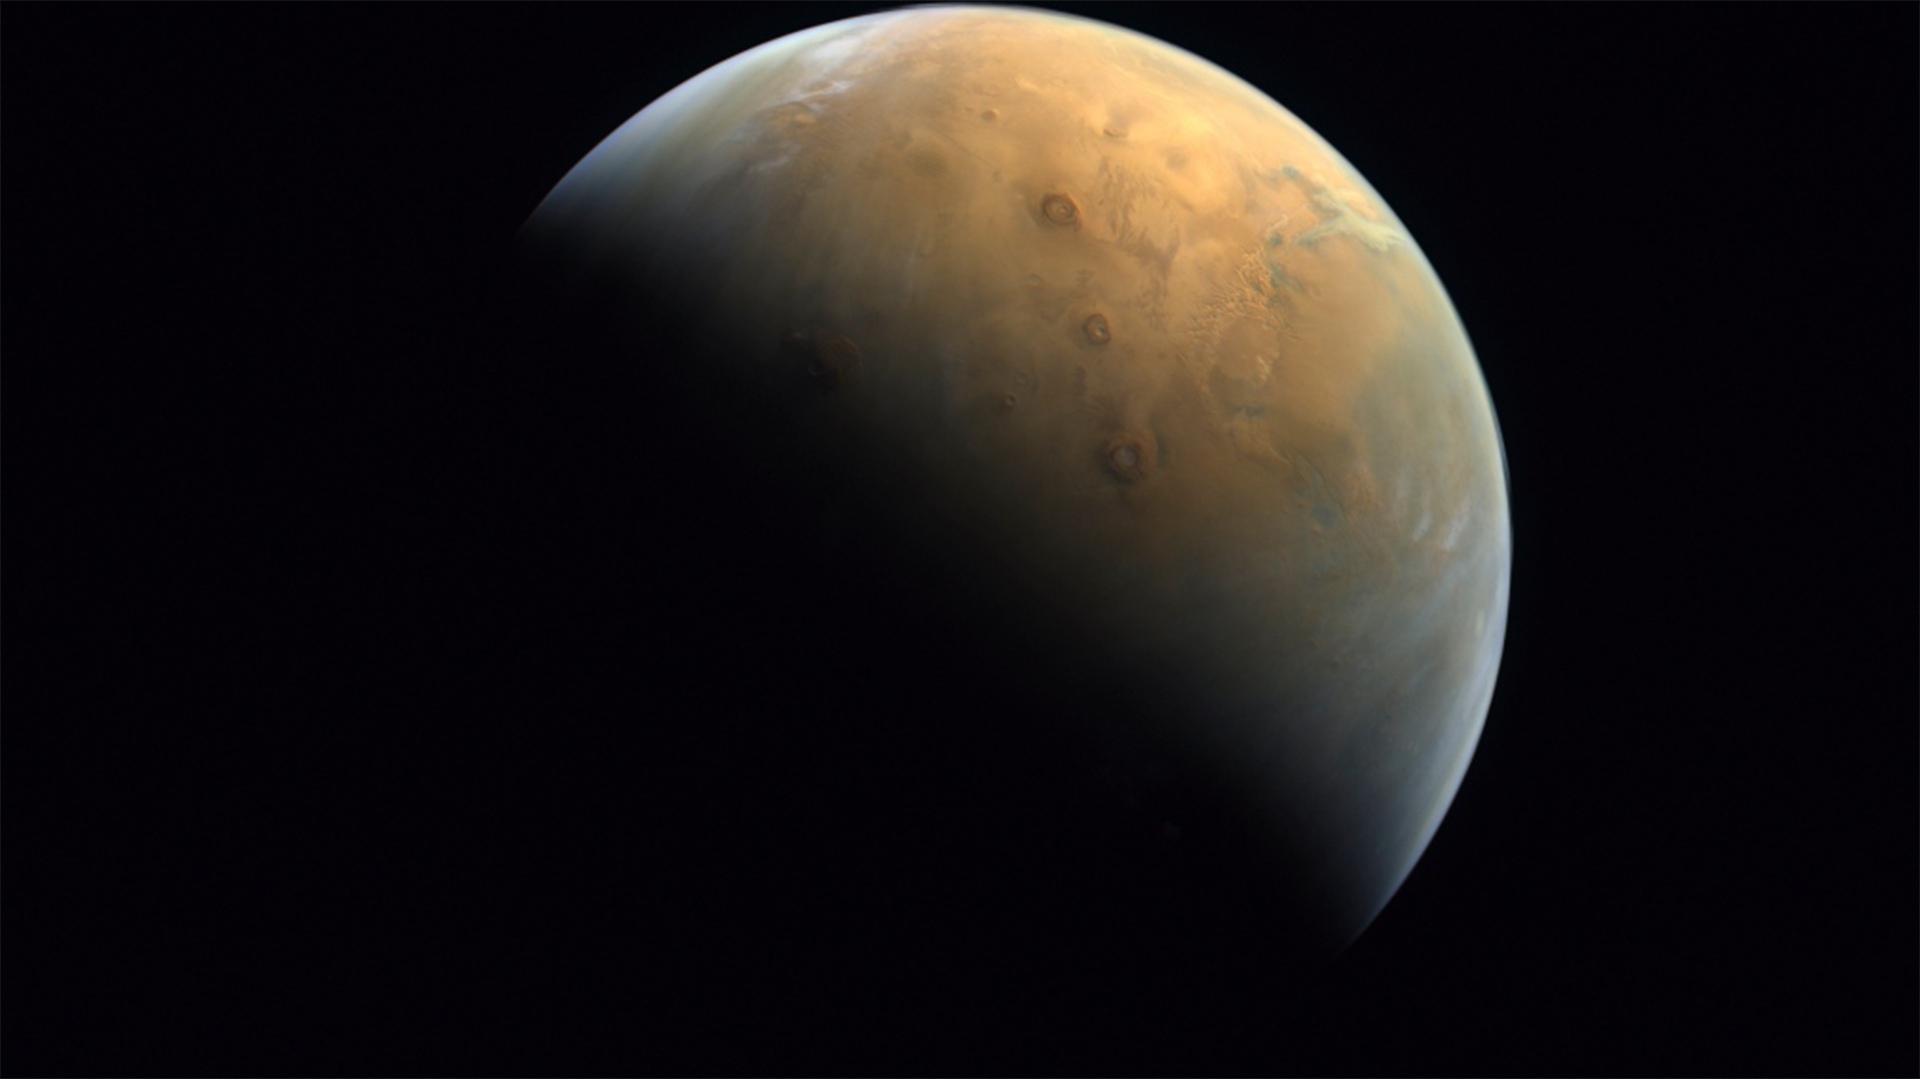  This Feb. 10, 2021 image taken by the United Arab Emirates' "Amal," or "Hope," probe was released Sunday, Feb. 14, 2021, shows Mars . The Hope space probe now circles the red planet. (Mohammed bin Rashid Space Center/UAE Space Agency, via AP)